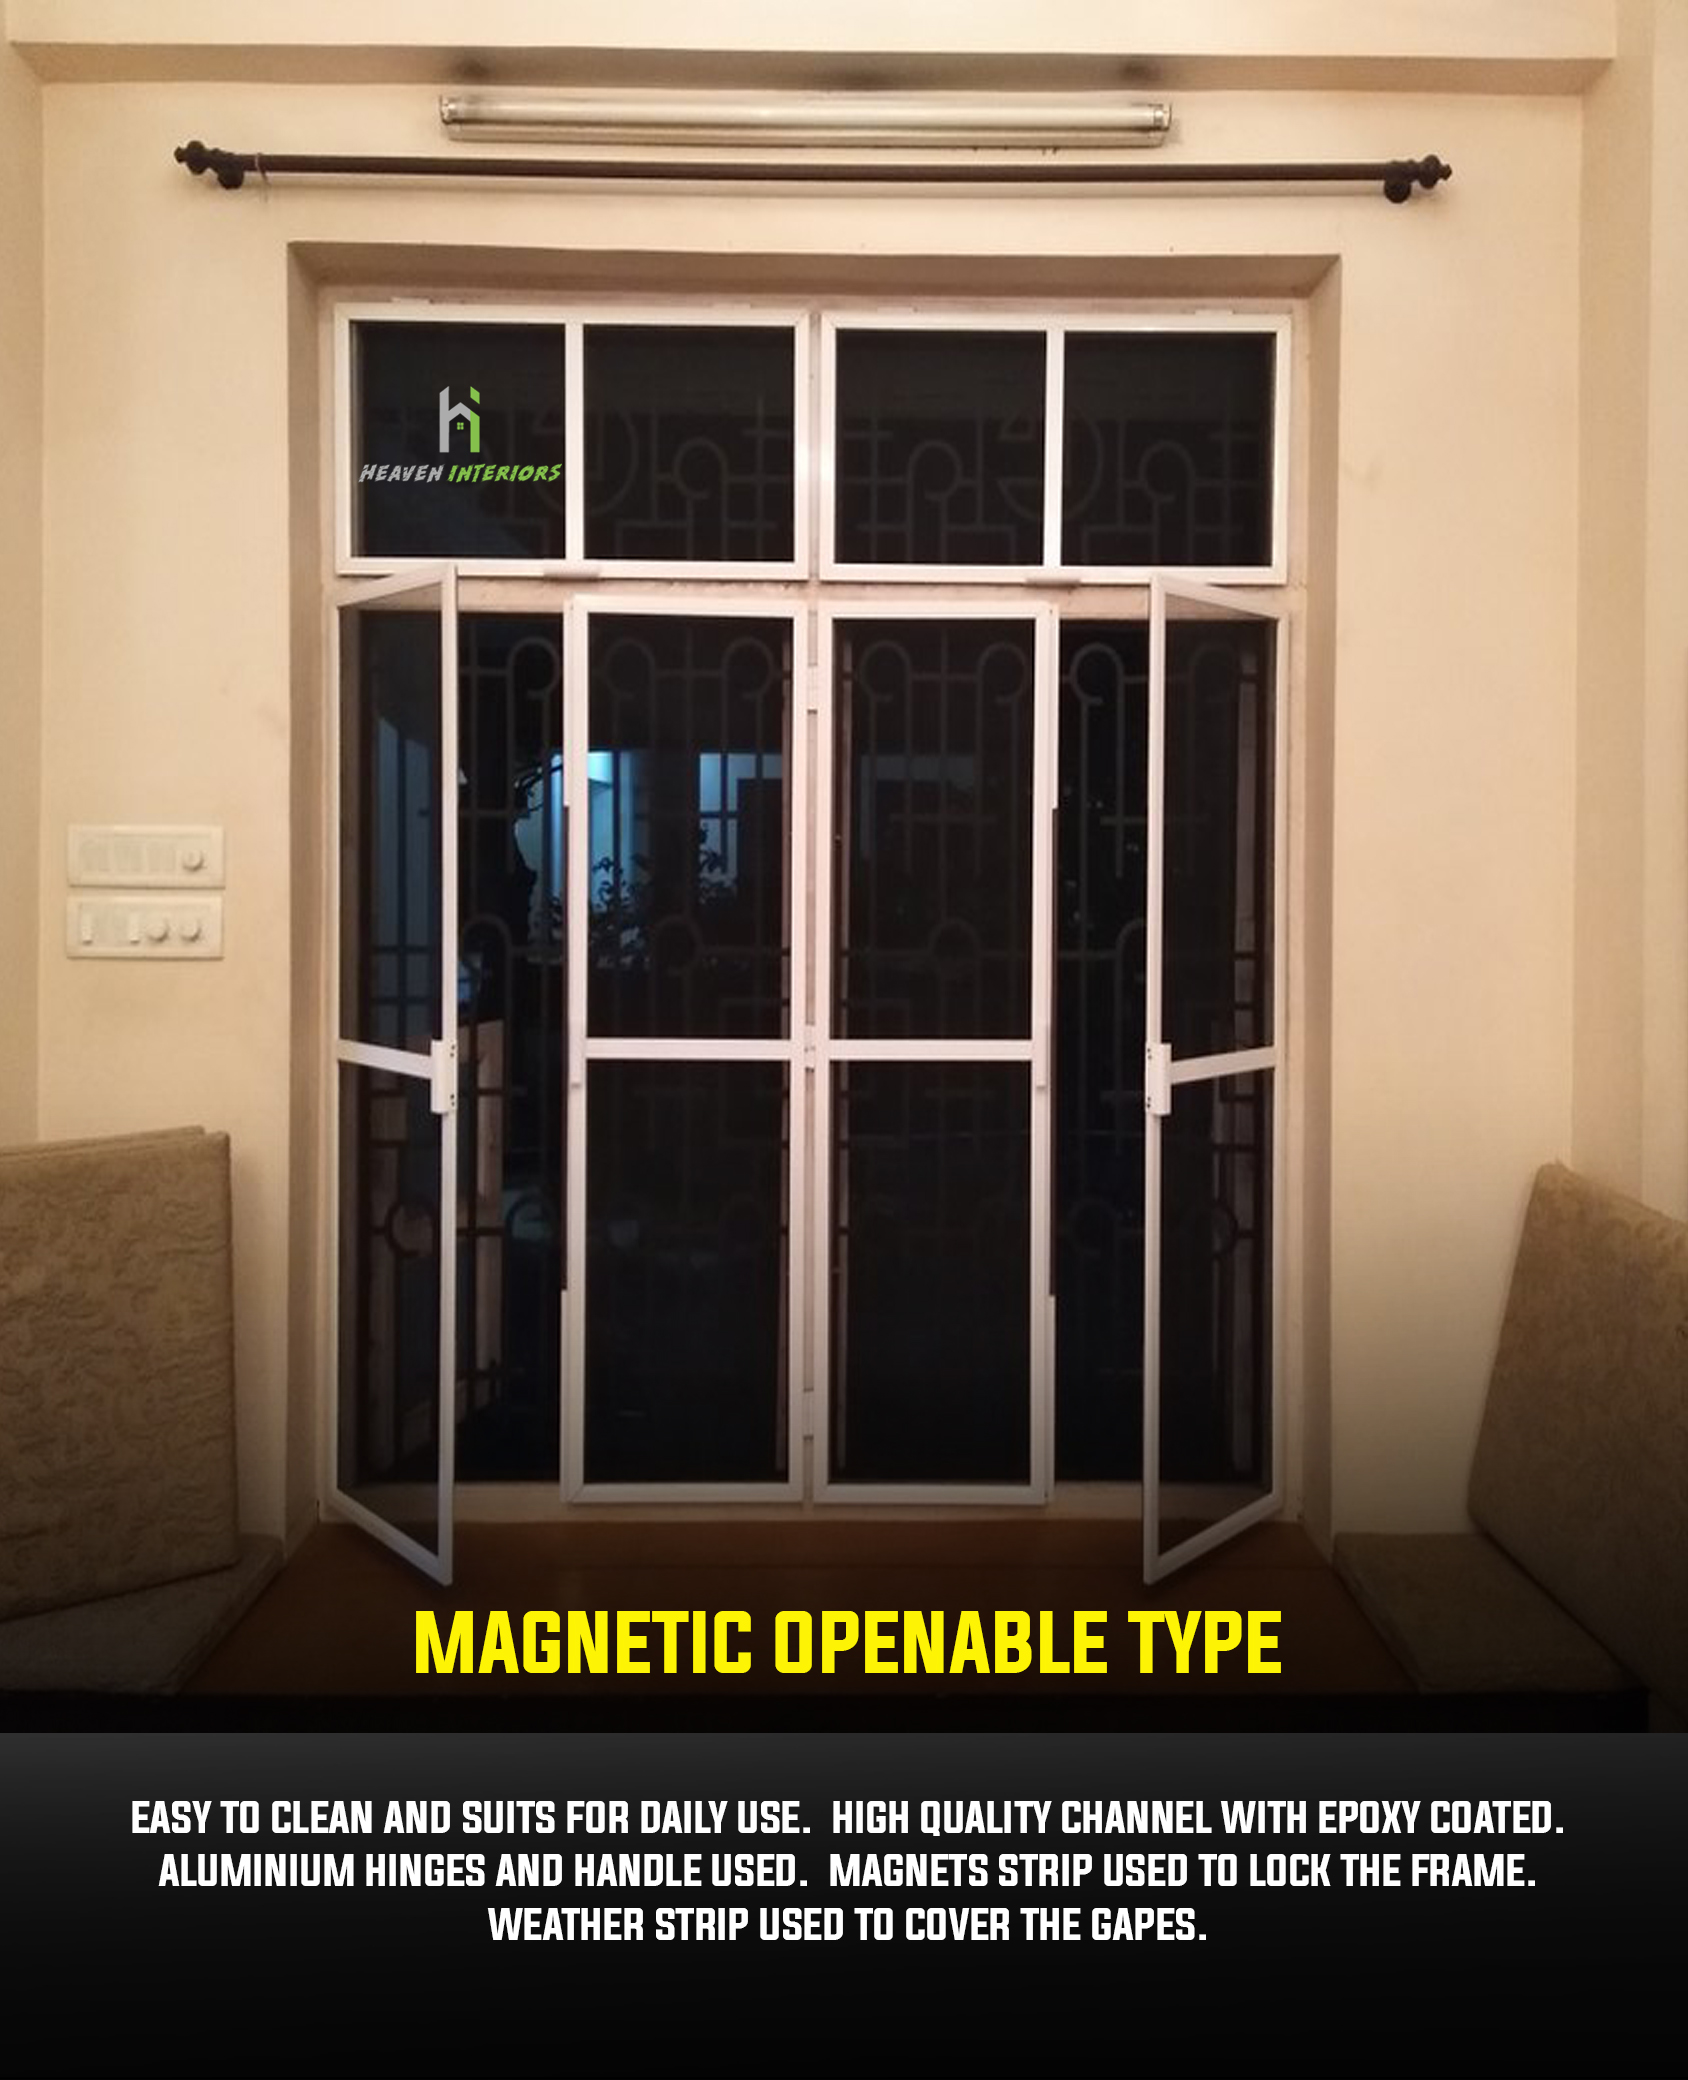 Magnetic openable type mosquito nets